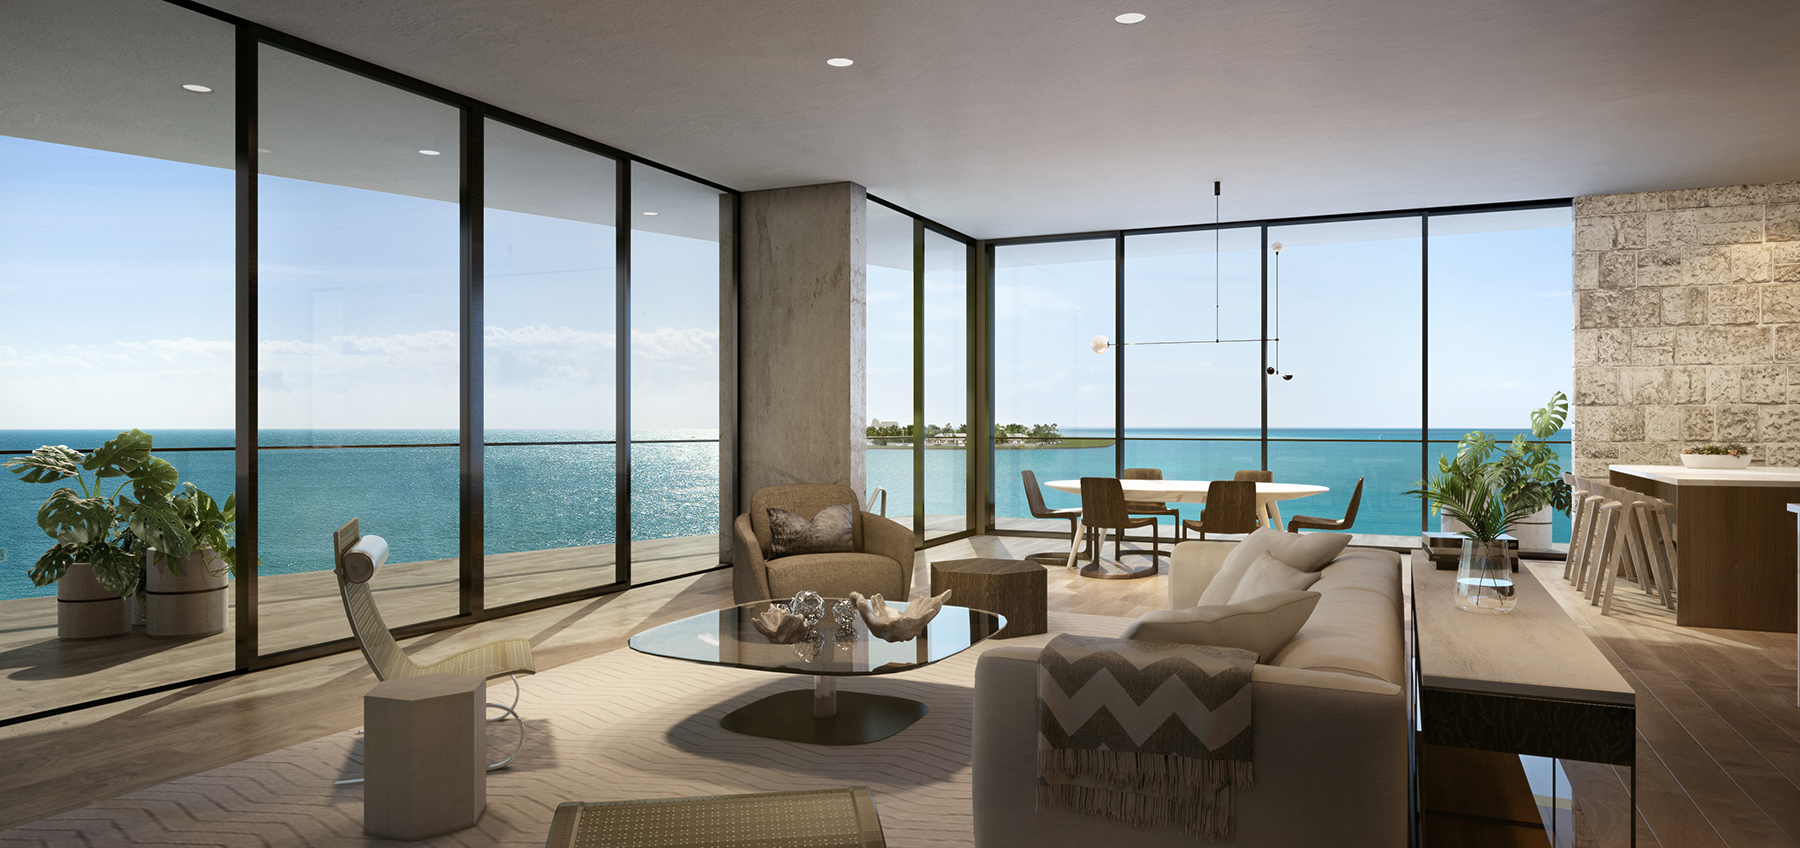 Rendering of a Fairchild Coconut Grove penthouse